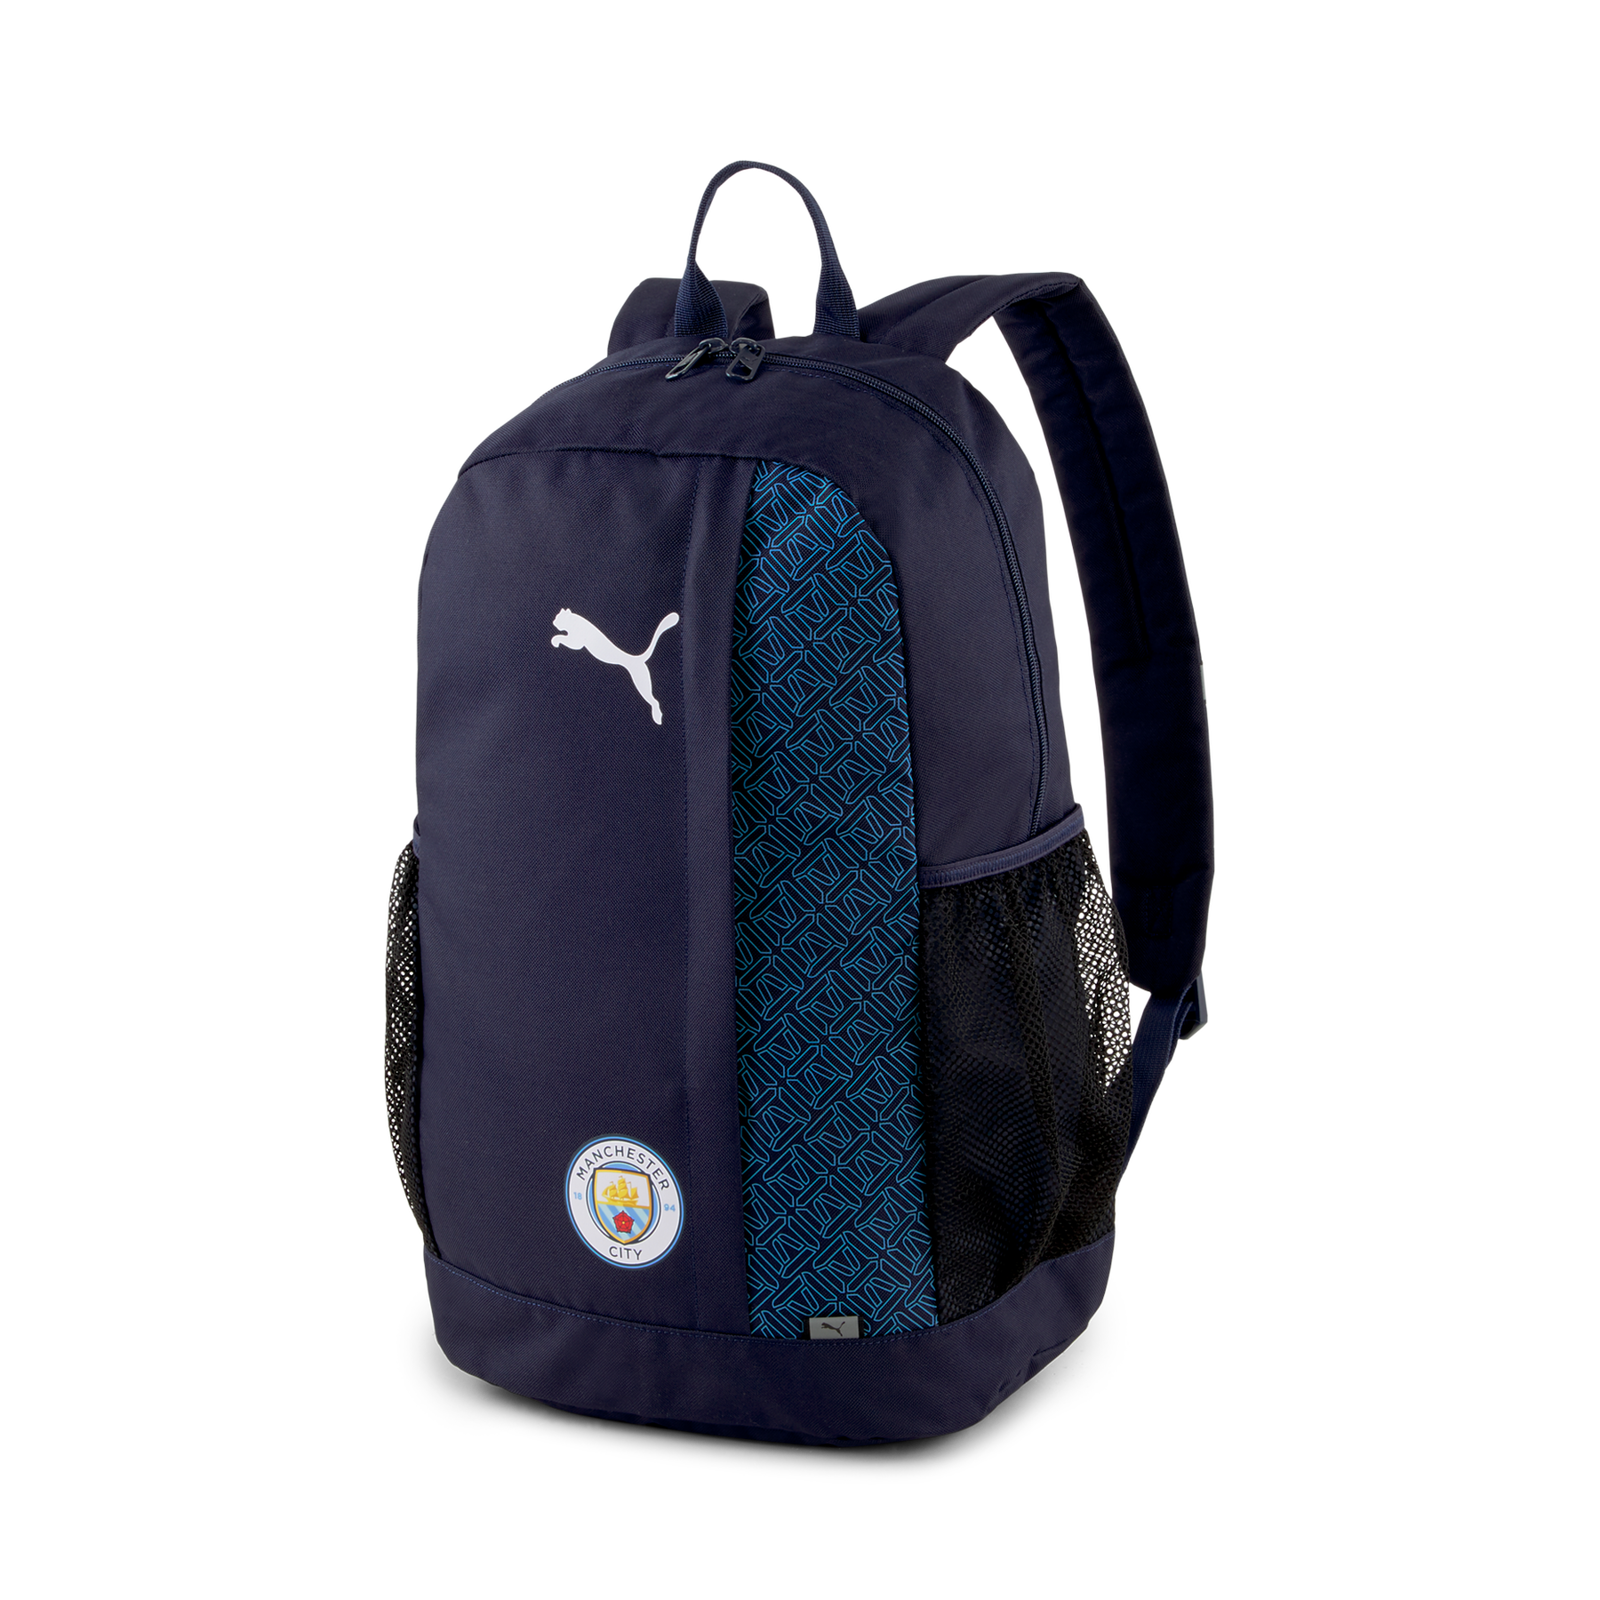 Manchester city backpack